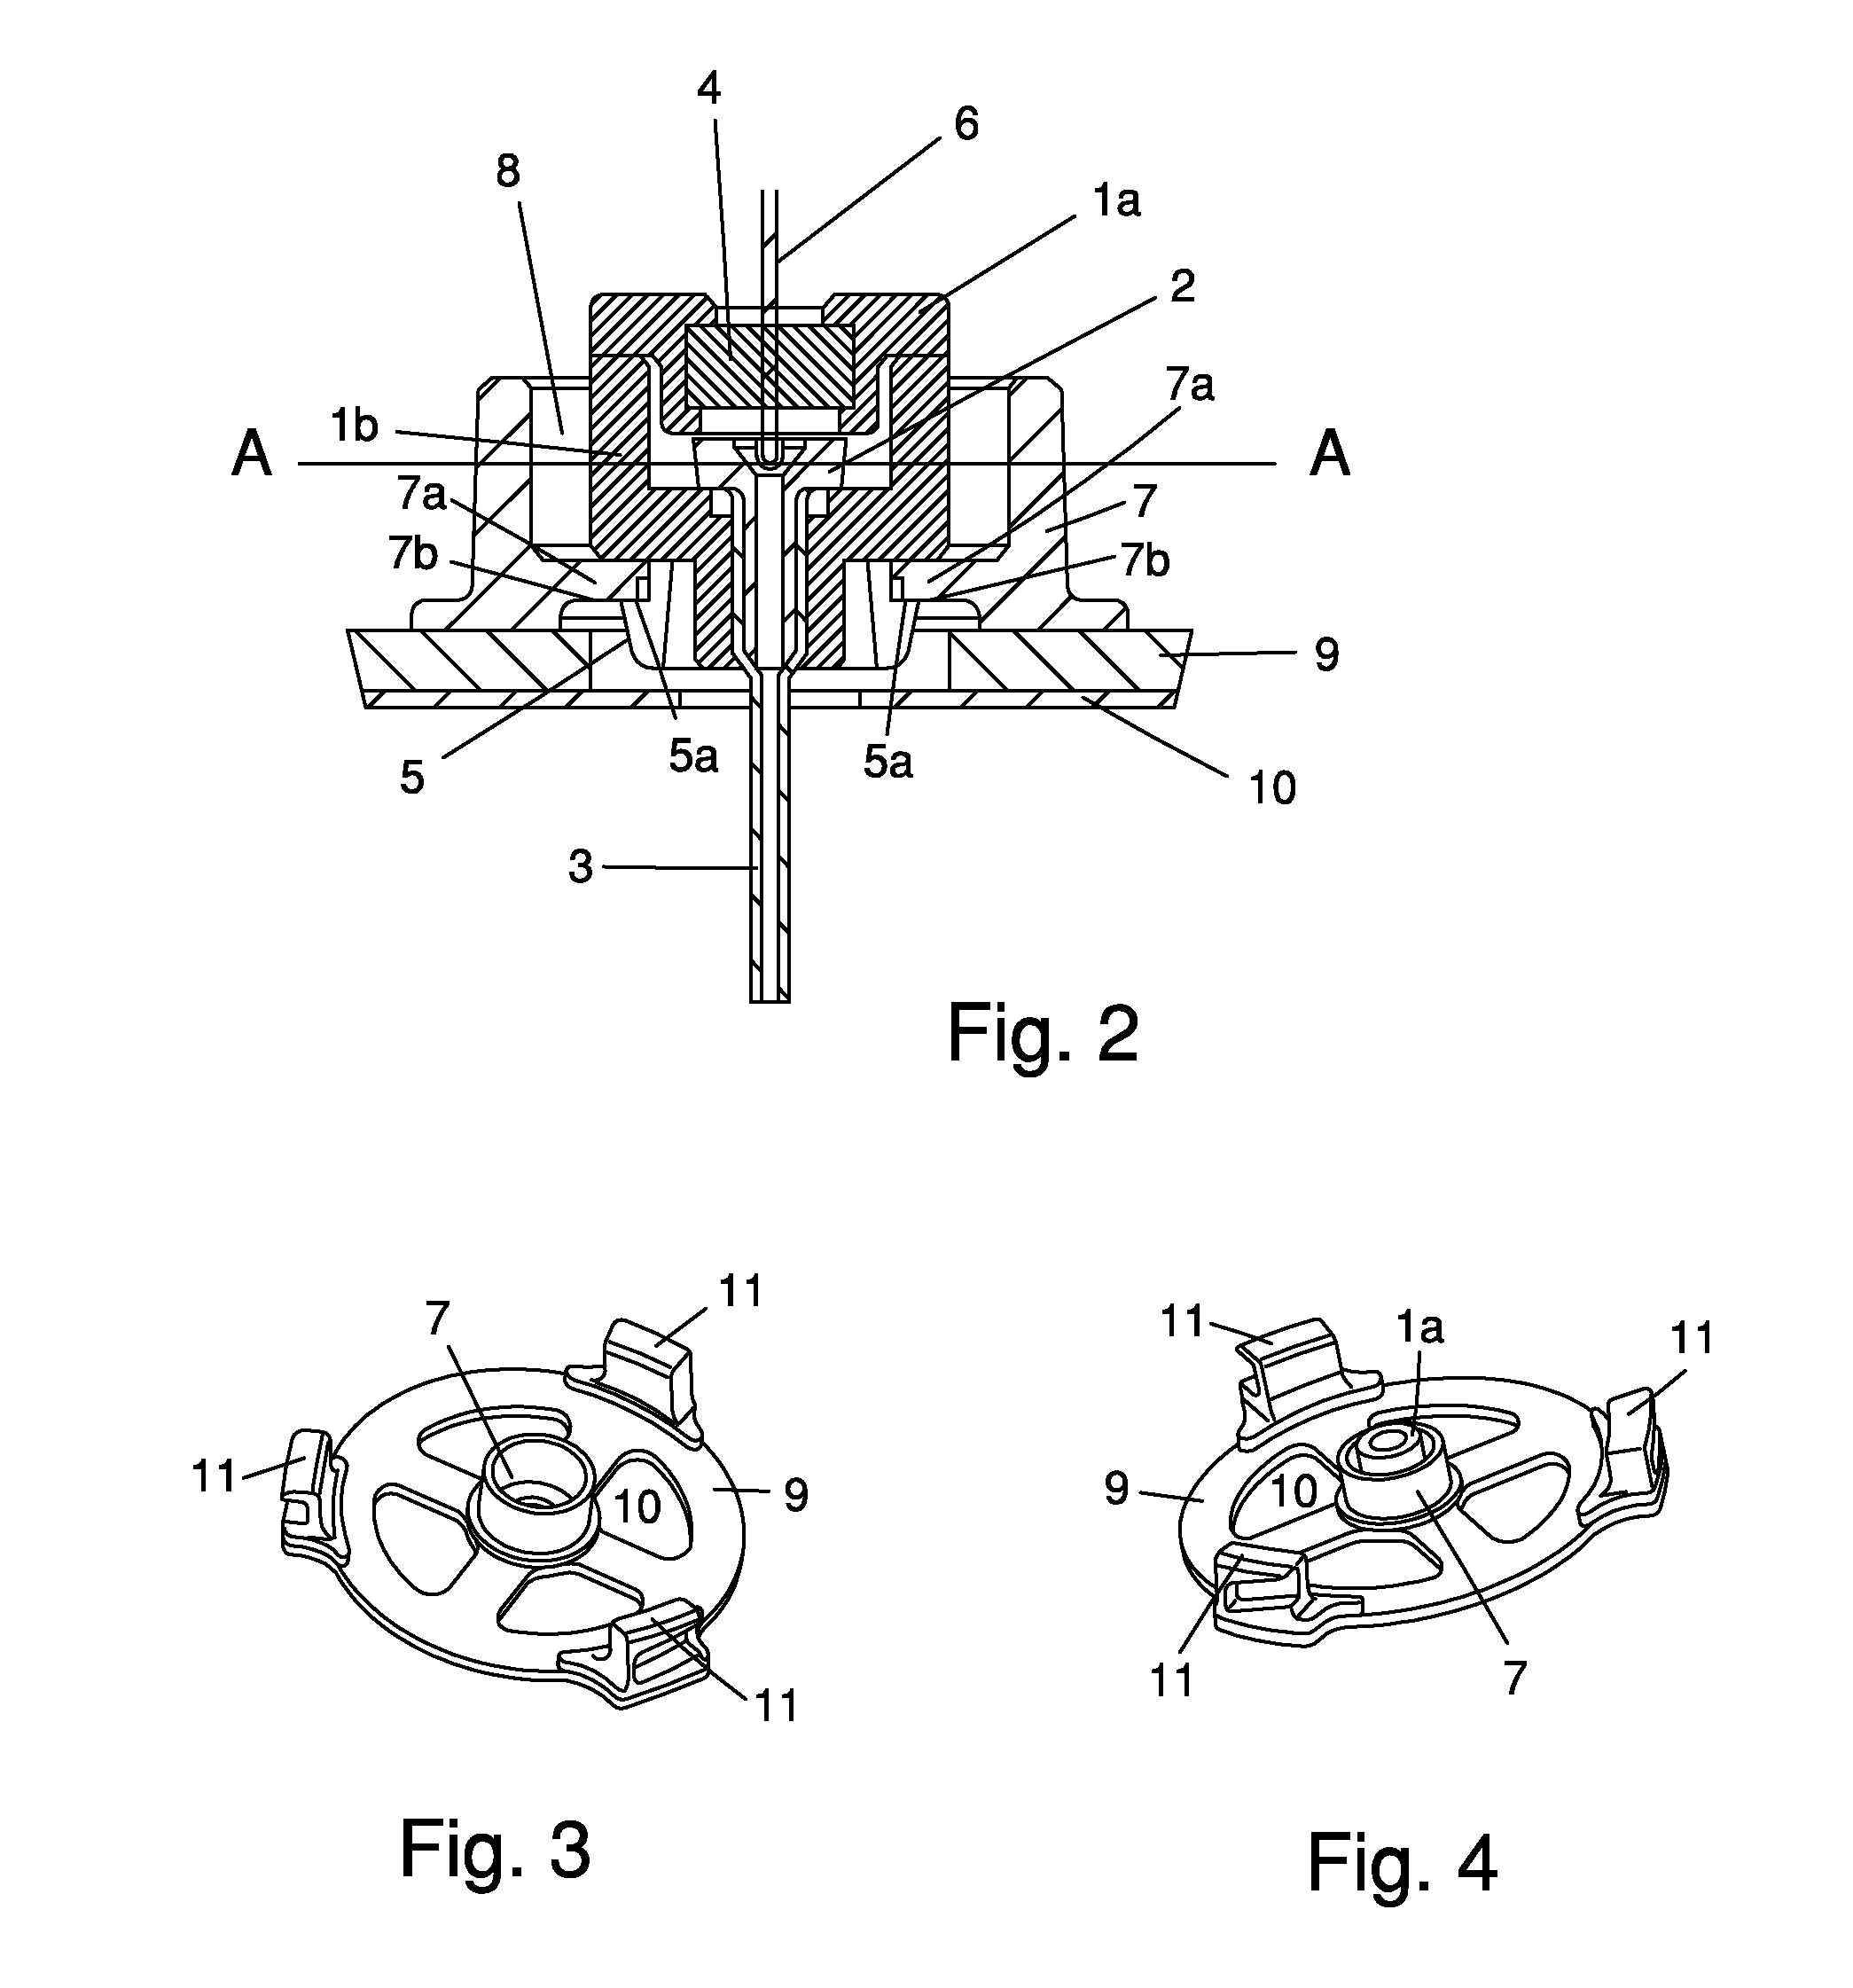 Cannula and delivery device